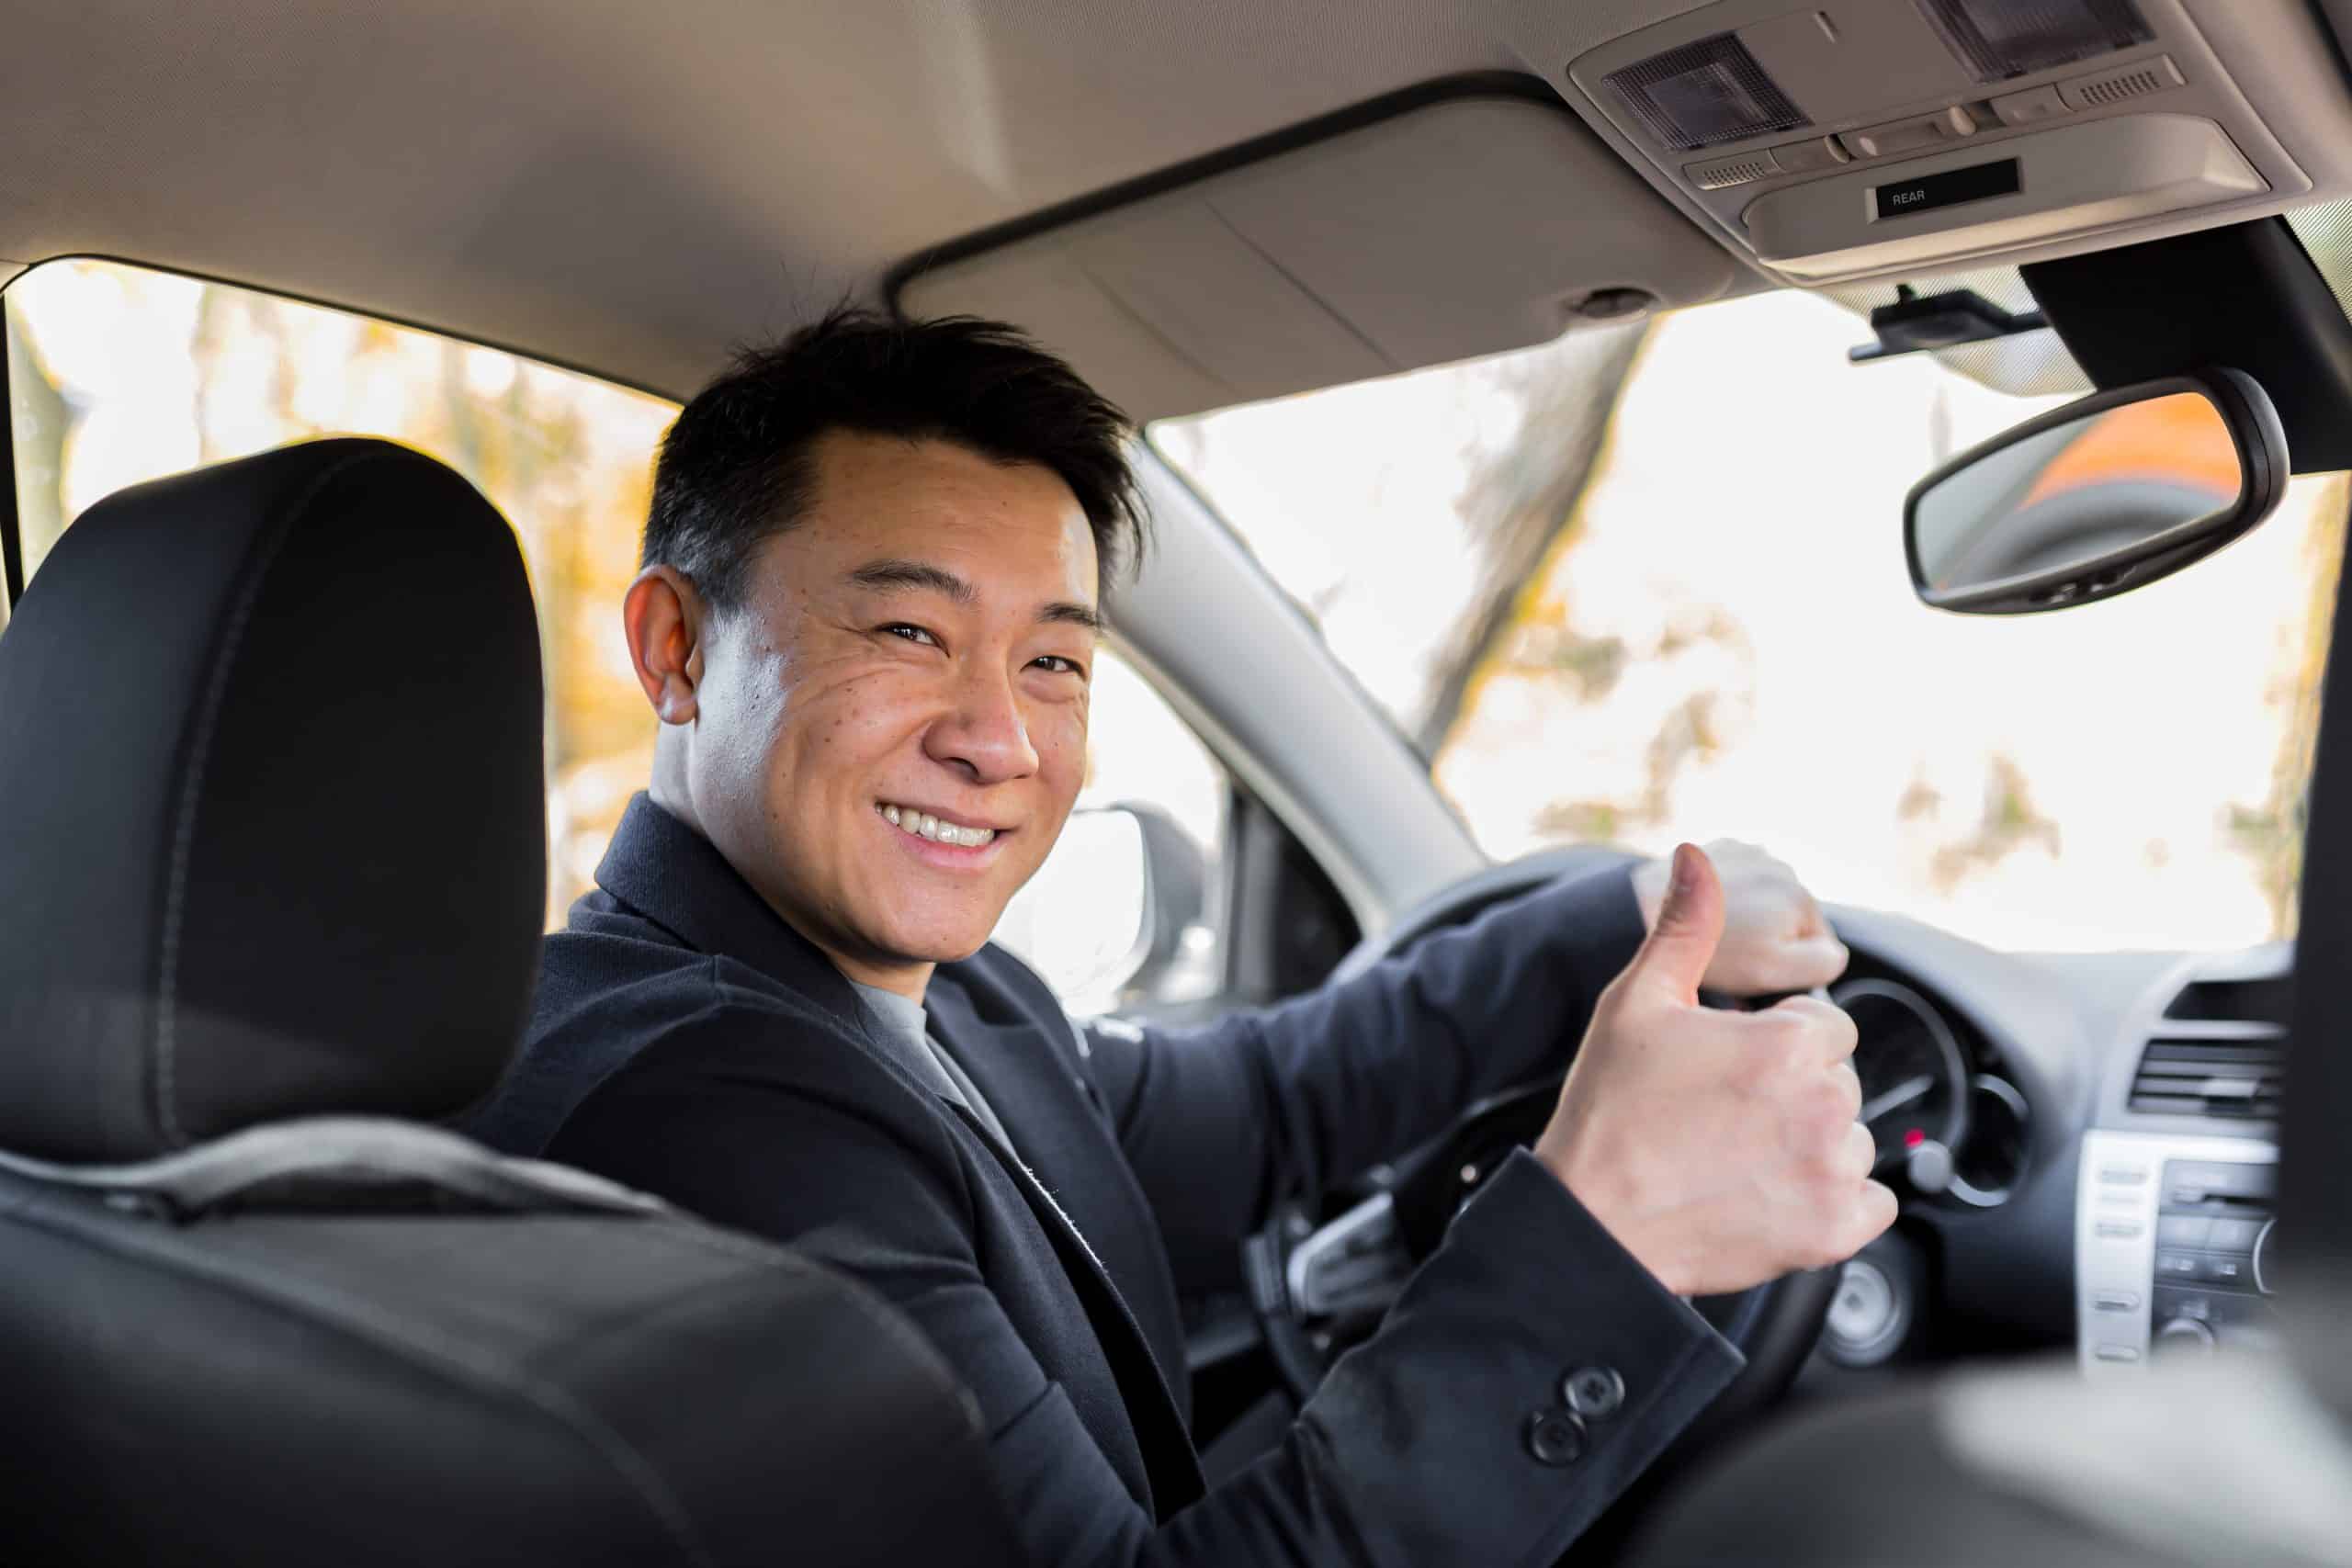 Compensation for Damages and Injuries from Ride-Sharing Services